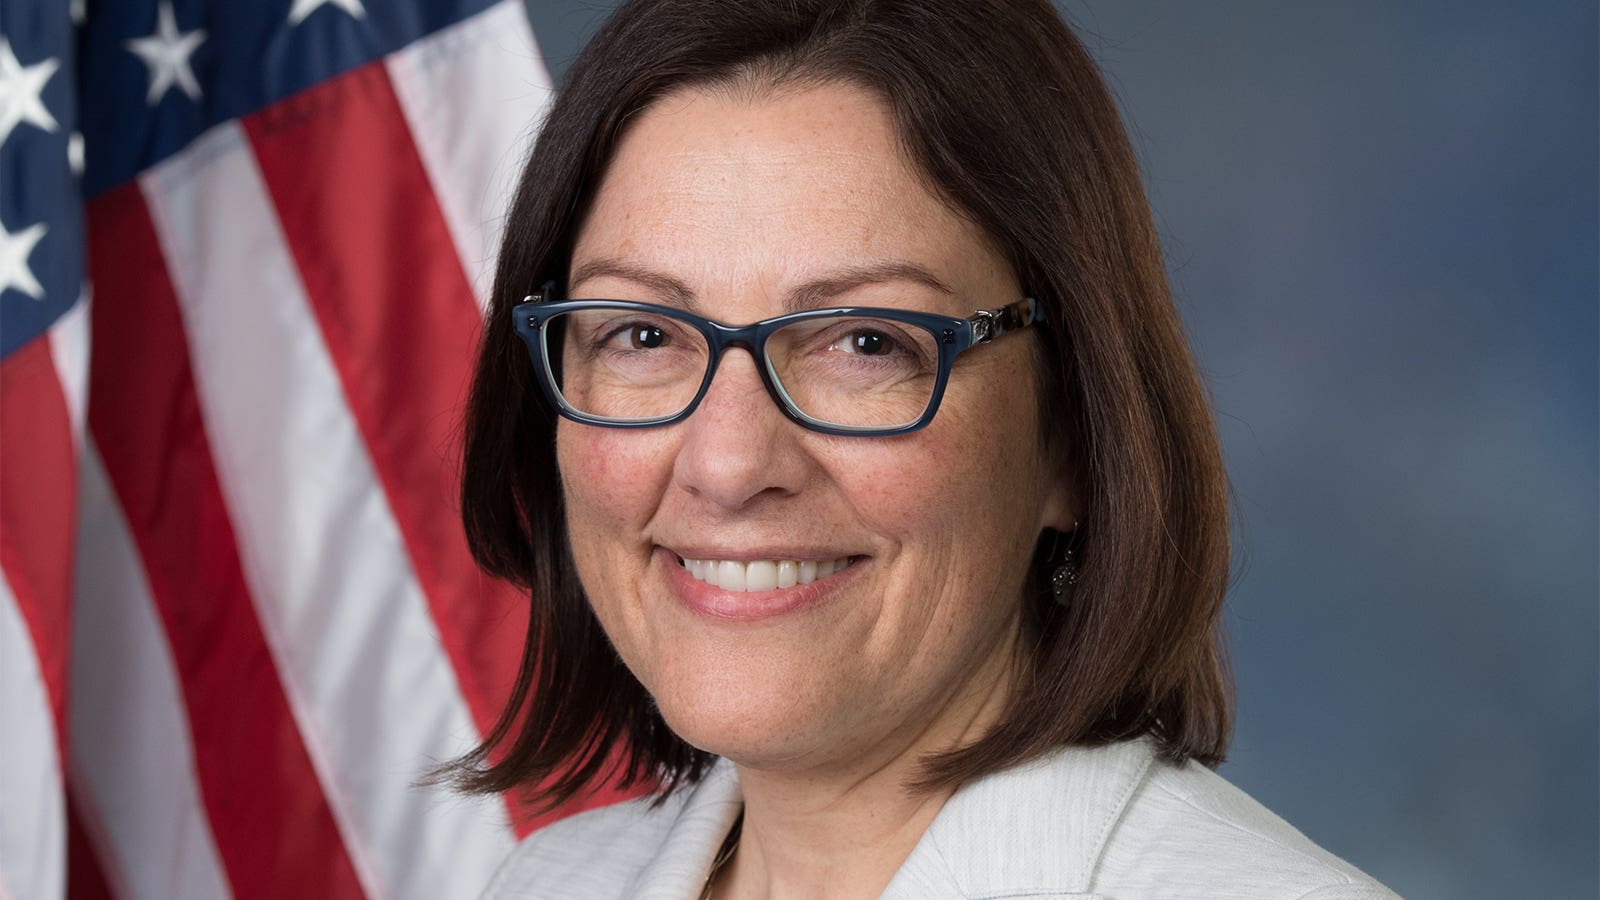 Q&A: Speaking Prior Authorization With Rating. Suzan DelBene